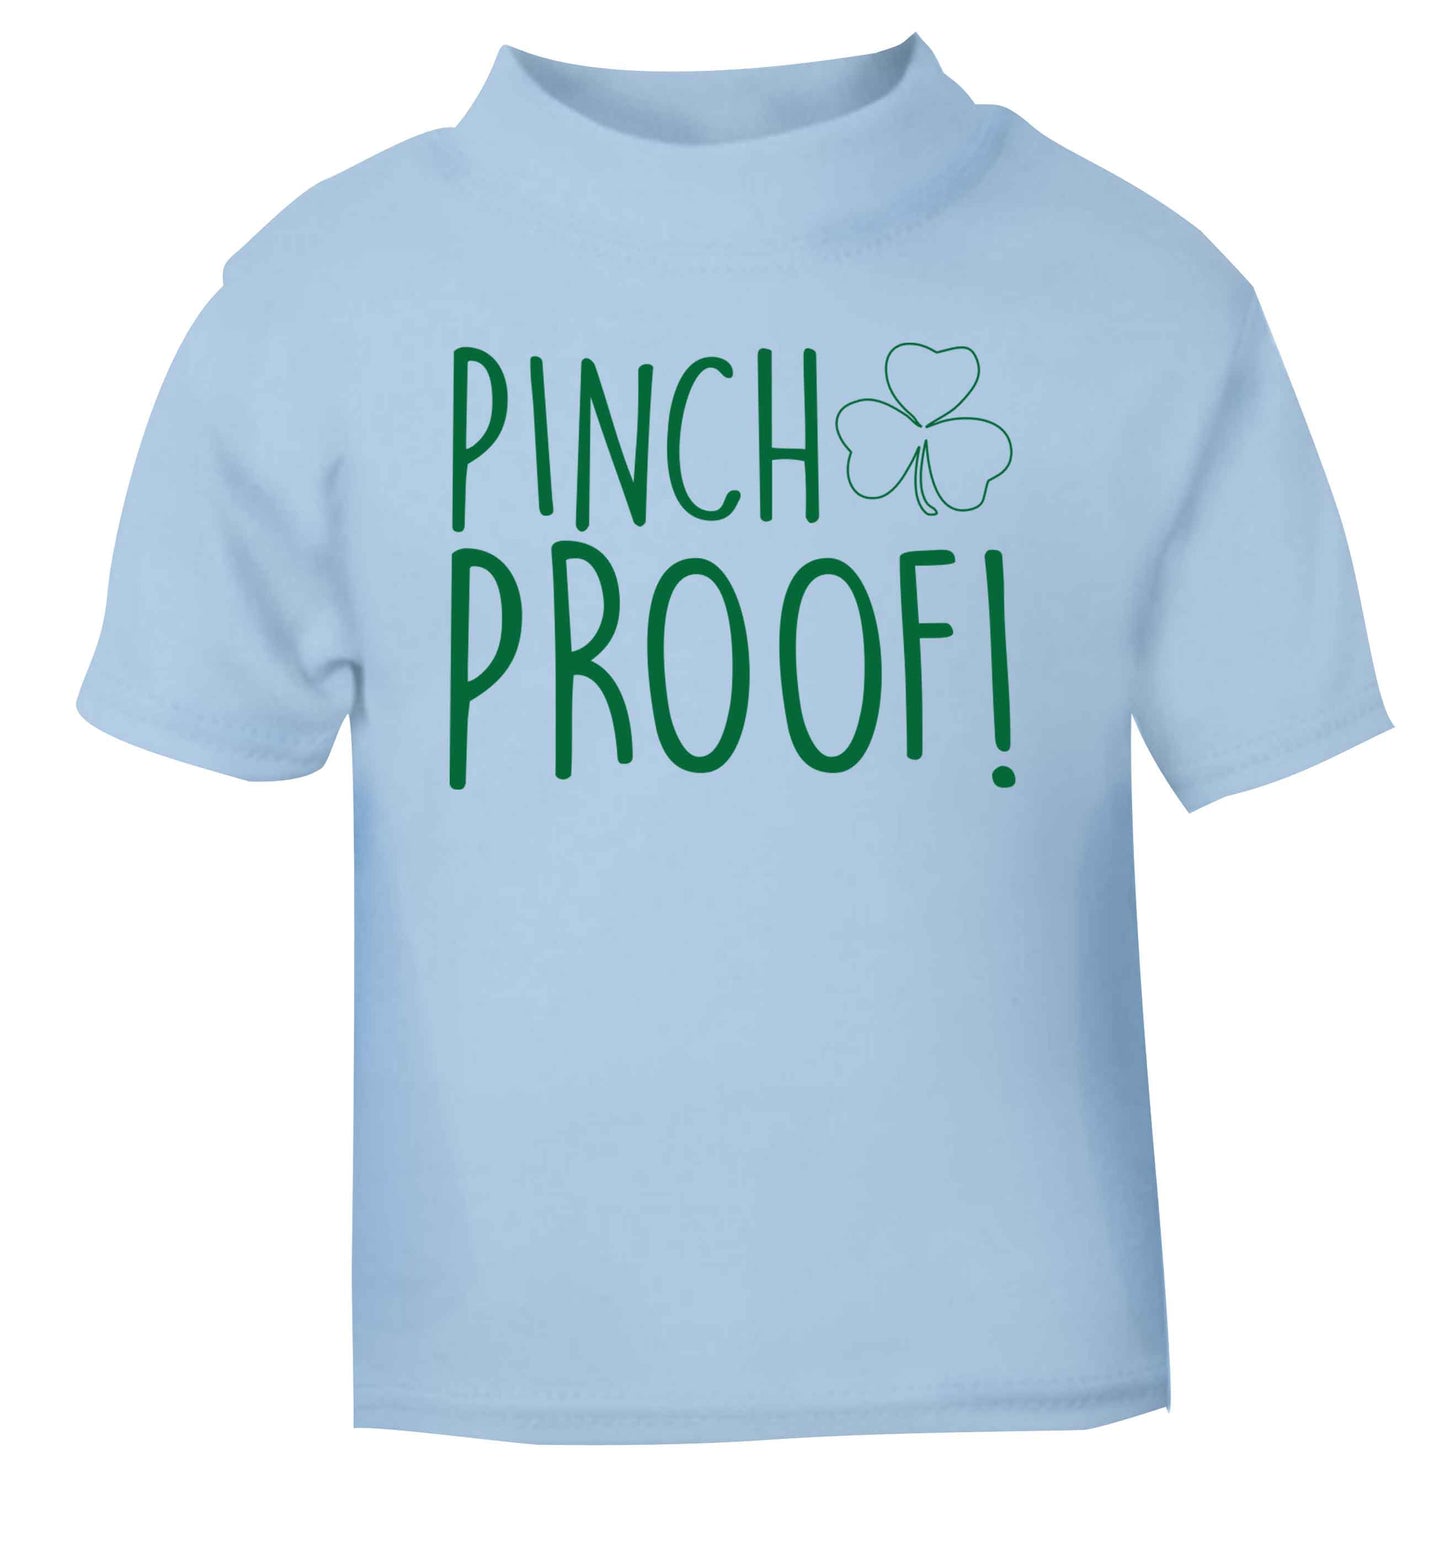 Pinch Proof light blue baby toddler Tshirt 2 Years